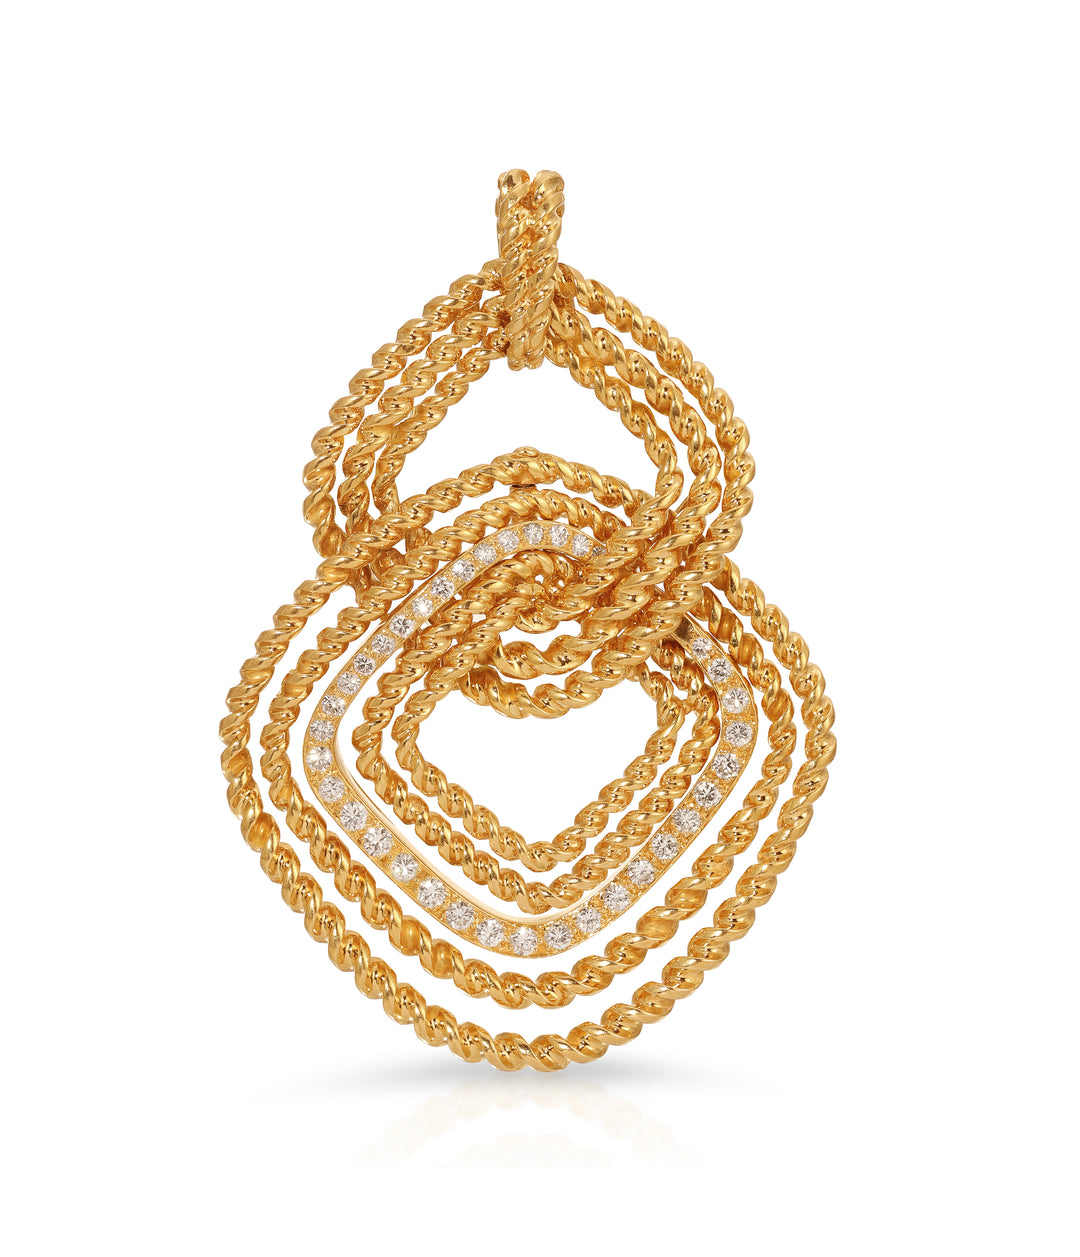 Van Cleef & Arpels Diamond and Twisted Gold Pendant